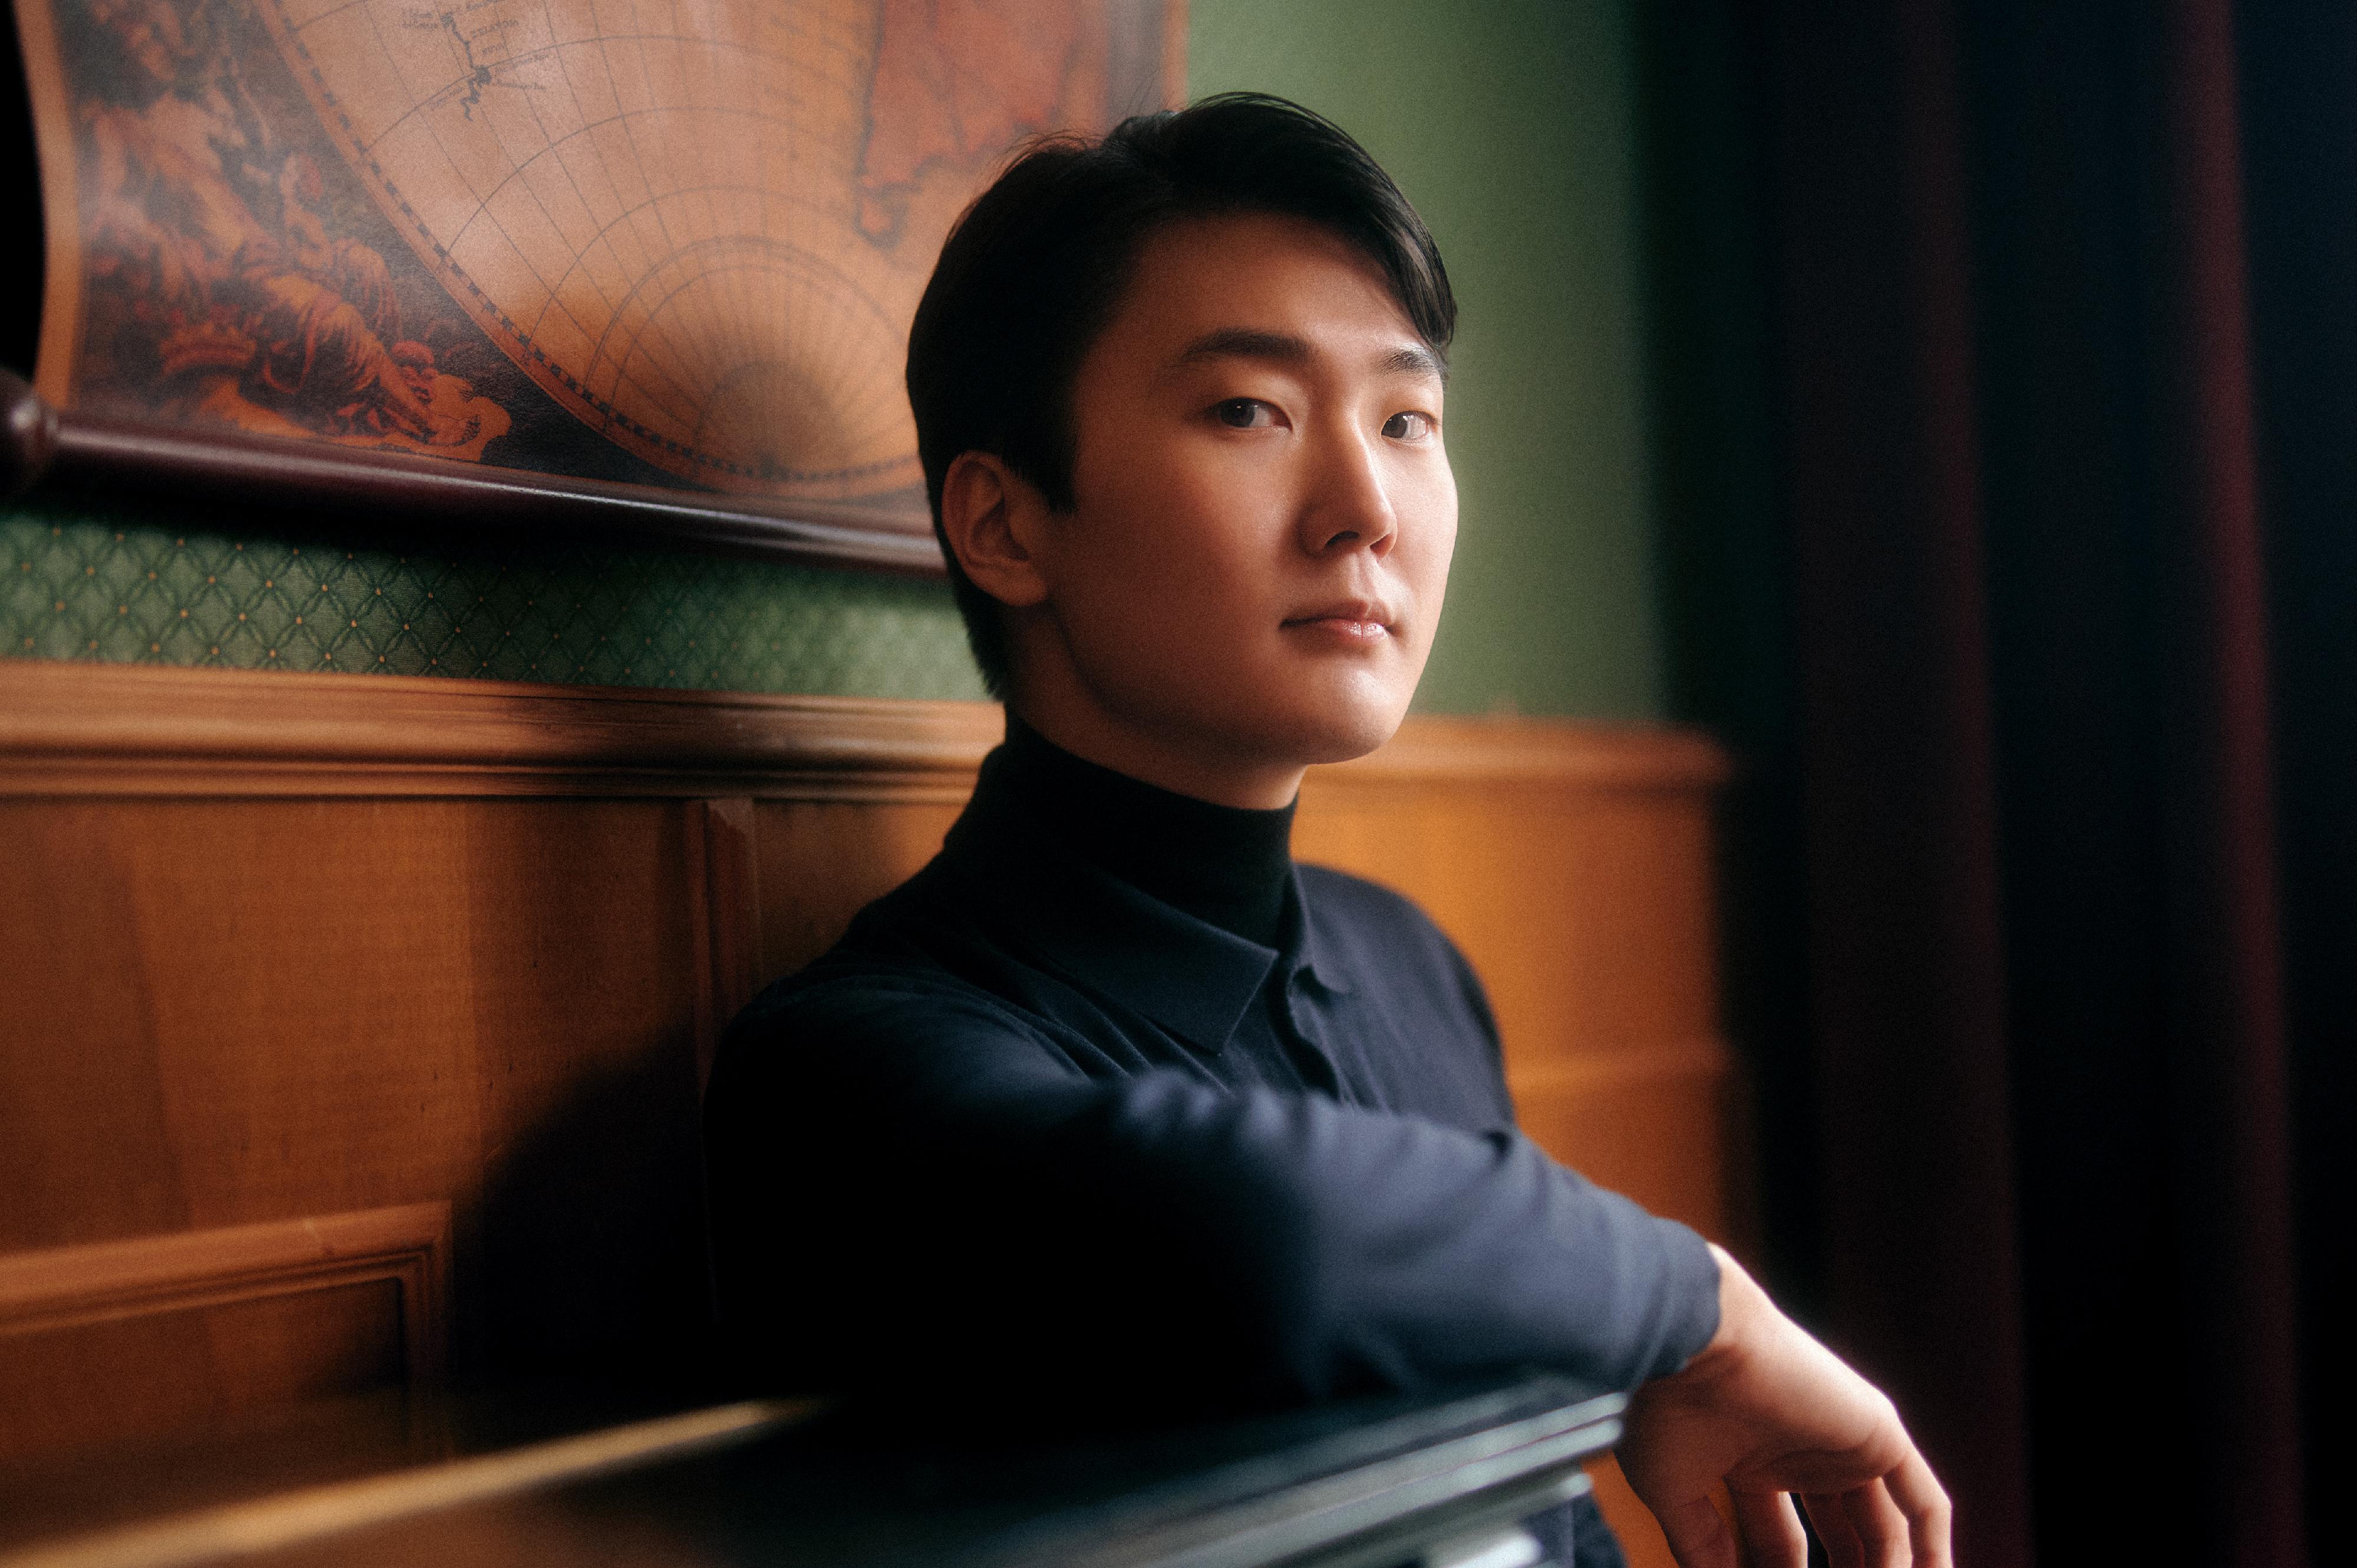 The Leisure and Cultural Services Department will present the Great Music 2023 from September to November. Photo shows pianist Seong-Jin Cho. (Source of photo: Christoph Koestlin-DG)